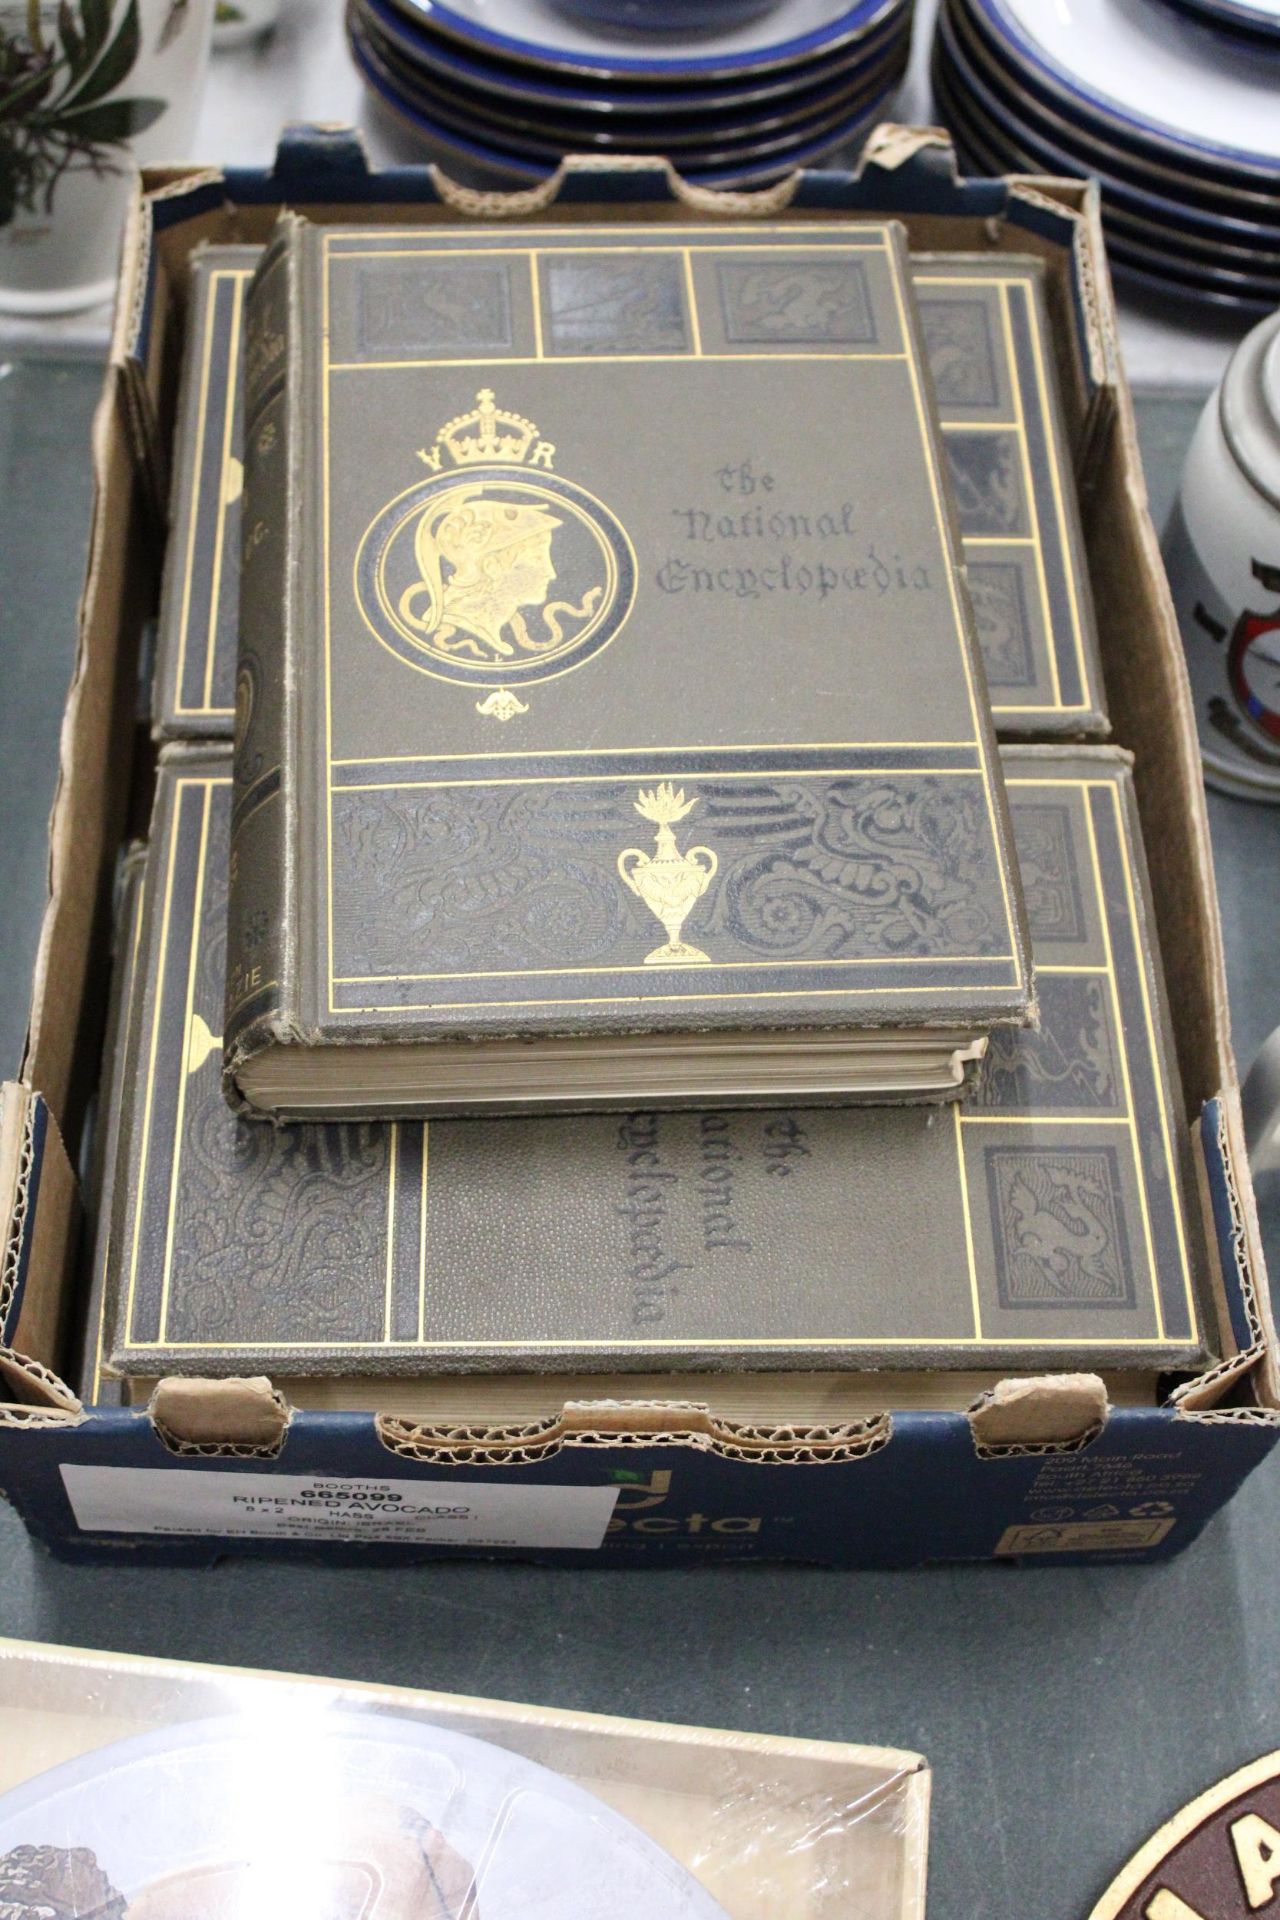 FIVE VOLUMES OF 'THE NATIONAL ENCYCLOPEDIA'